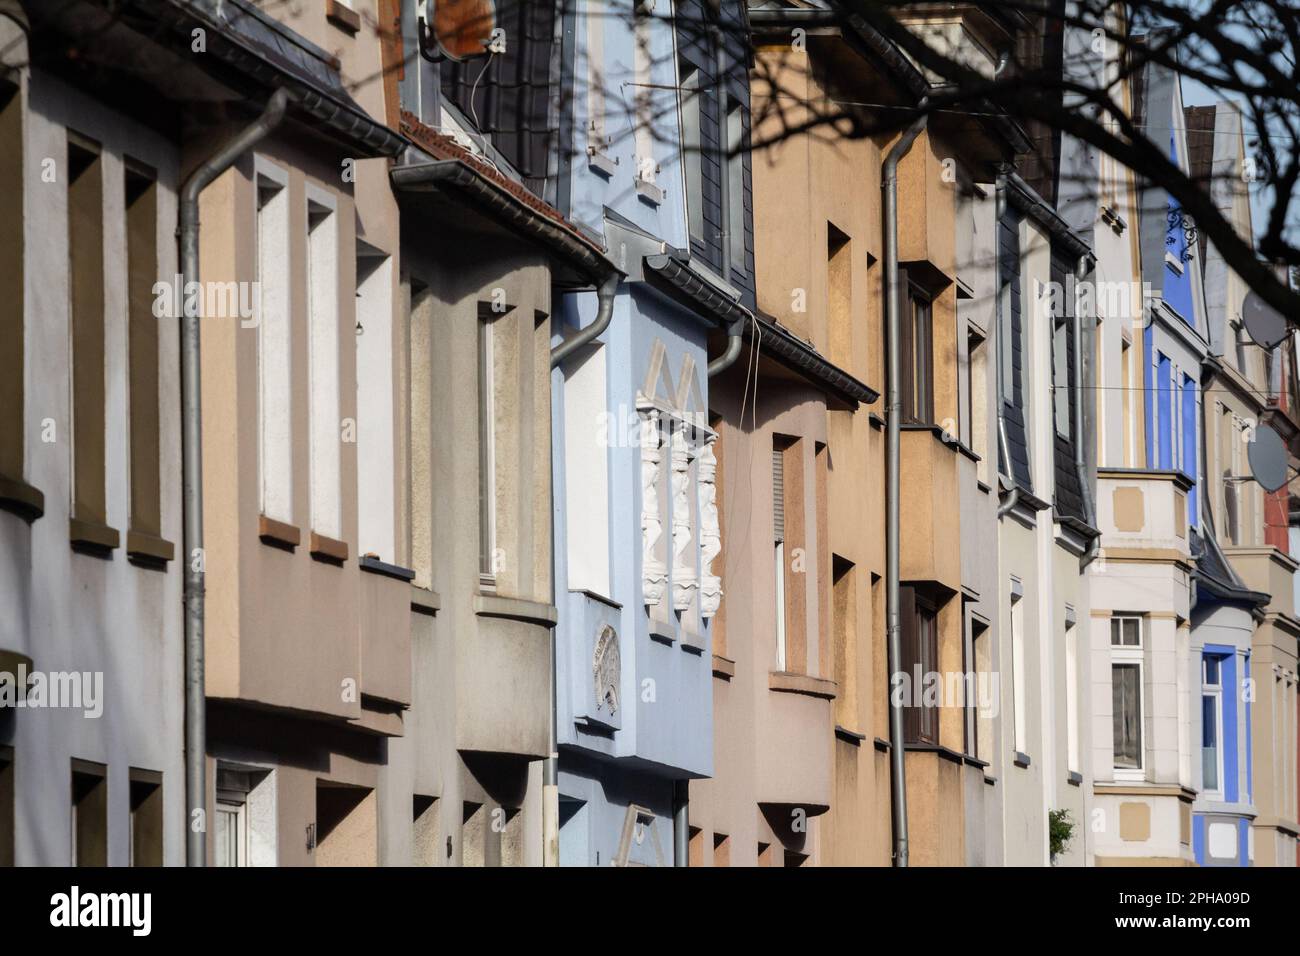 Picture of facades of residential building, with a vintage german architecture, in the city center of Cologne, Germany. Stock Photo